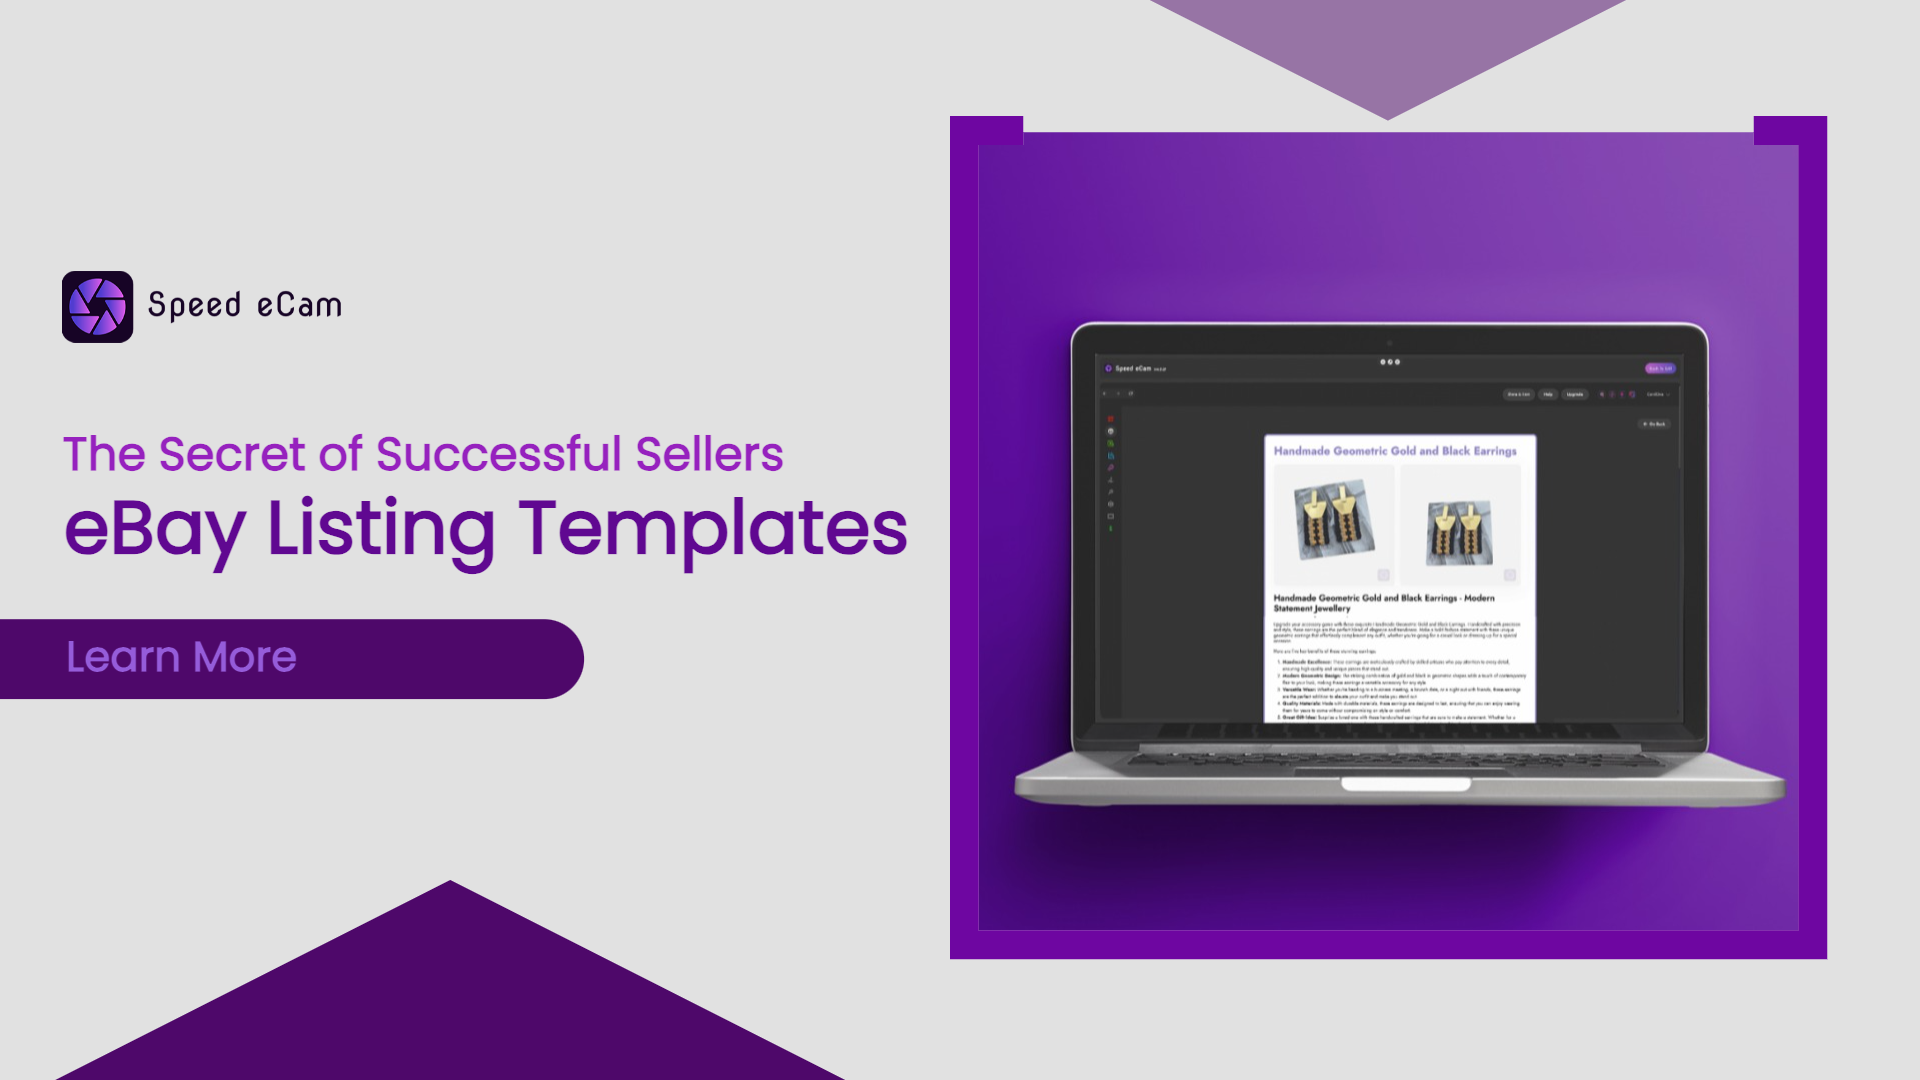 The Secret of Successful Sellers: eBay Listing Templates